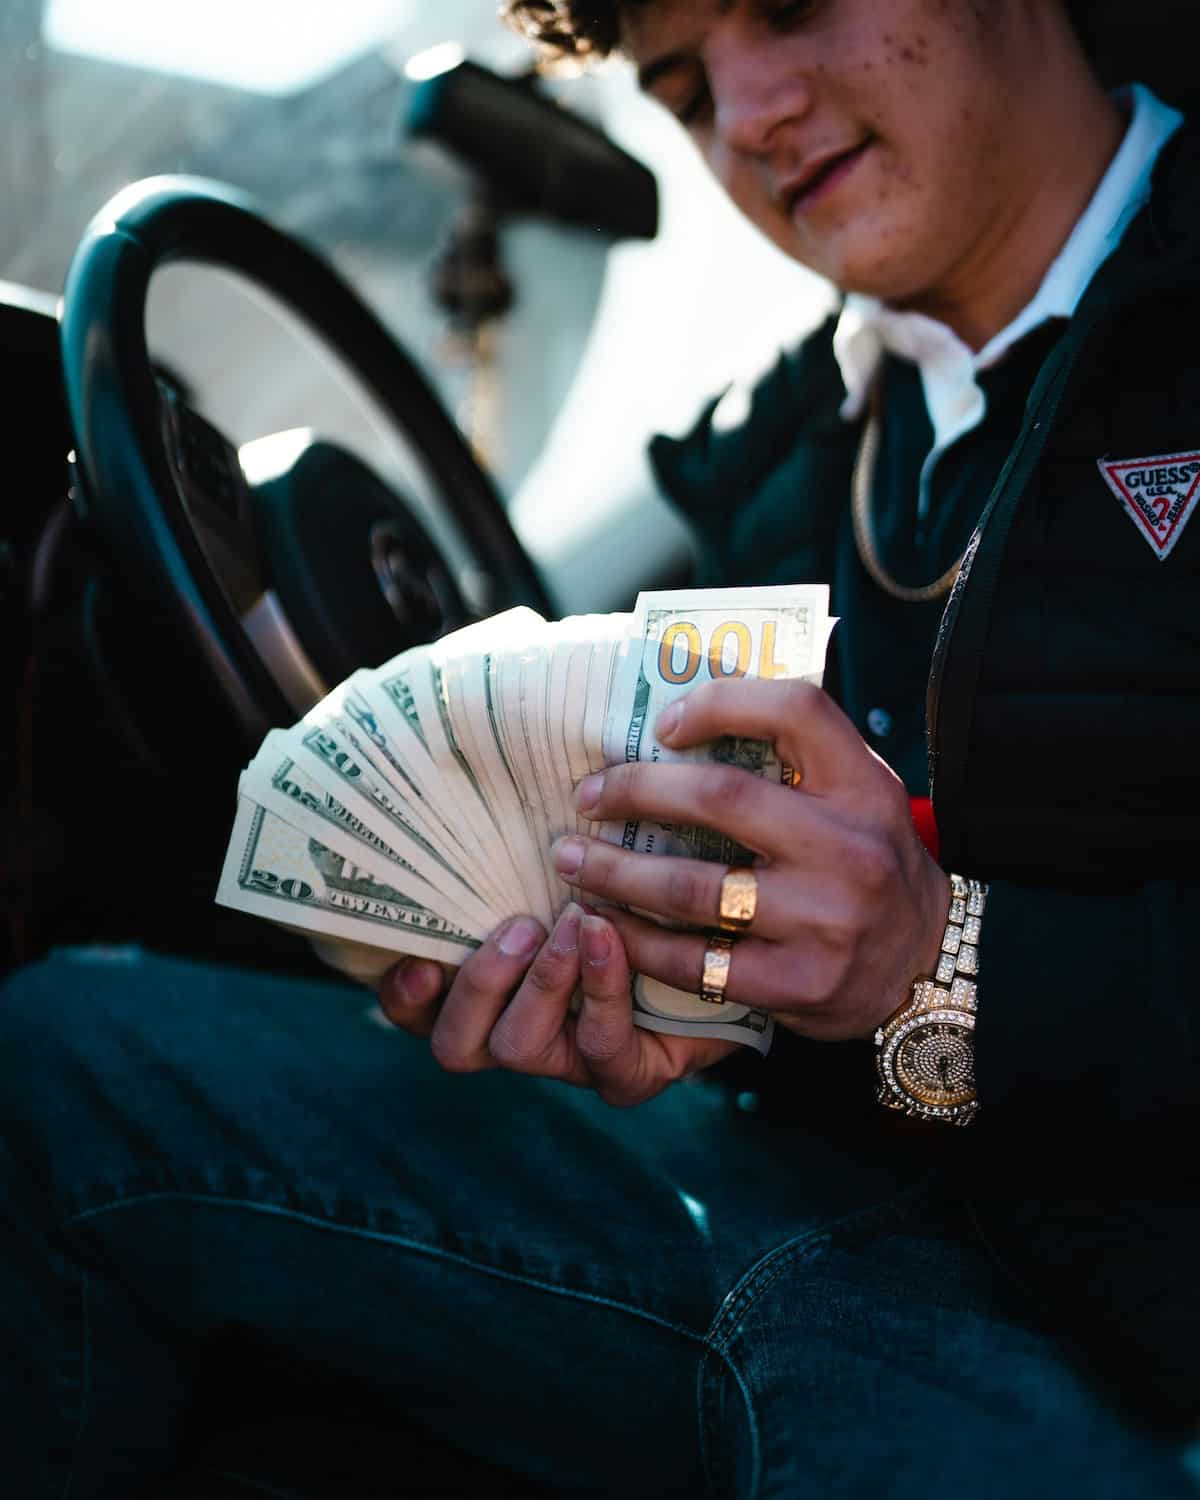 rich man in a car with hundreds in cash wearing designer clothes and gold jewelry.